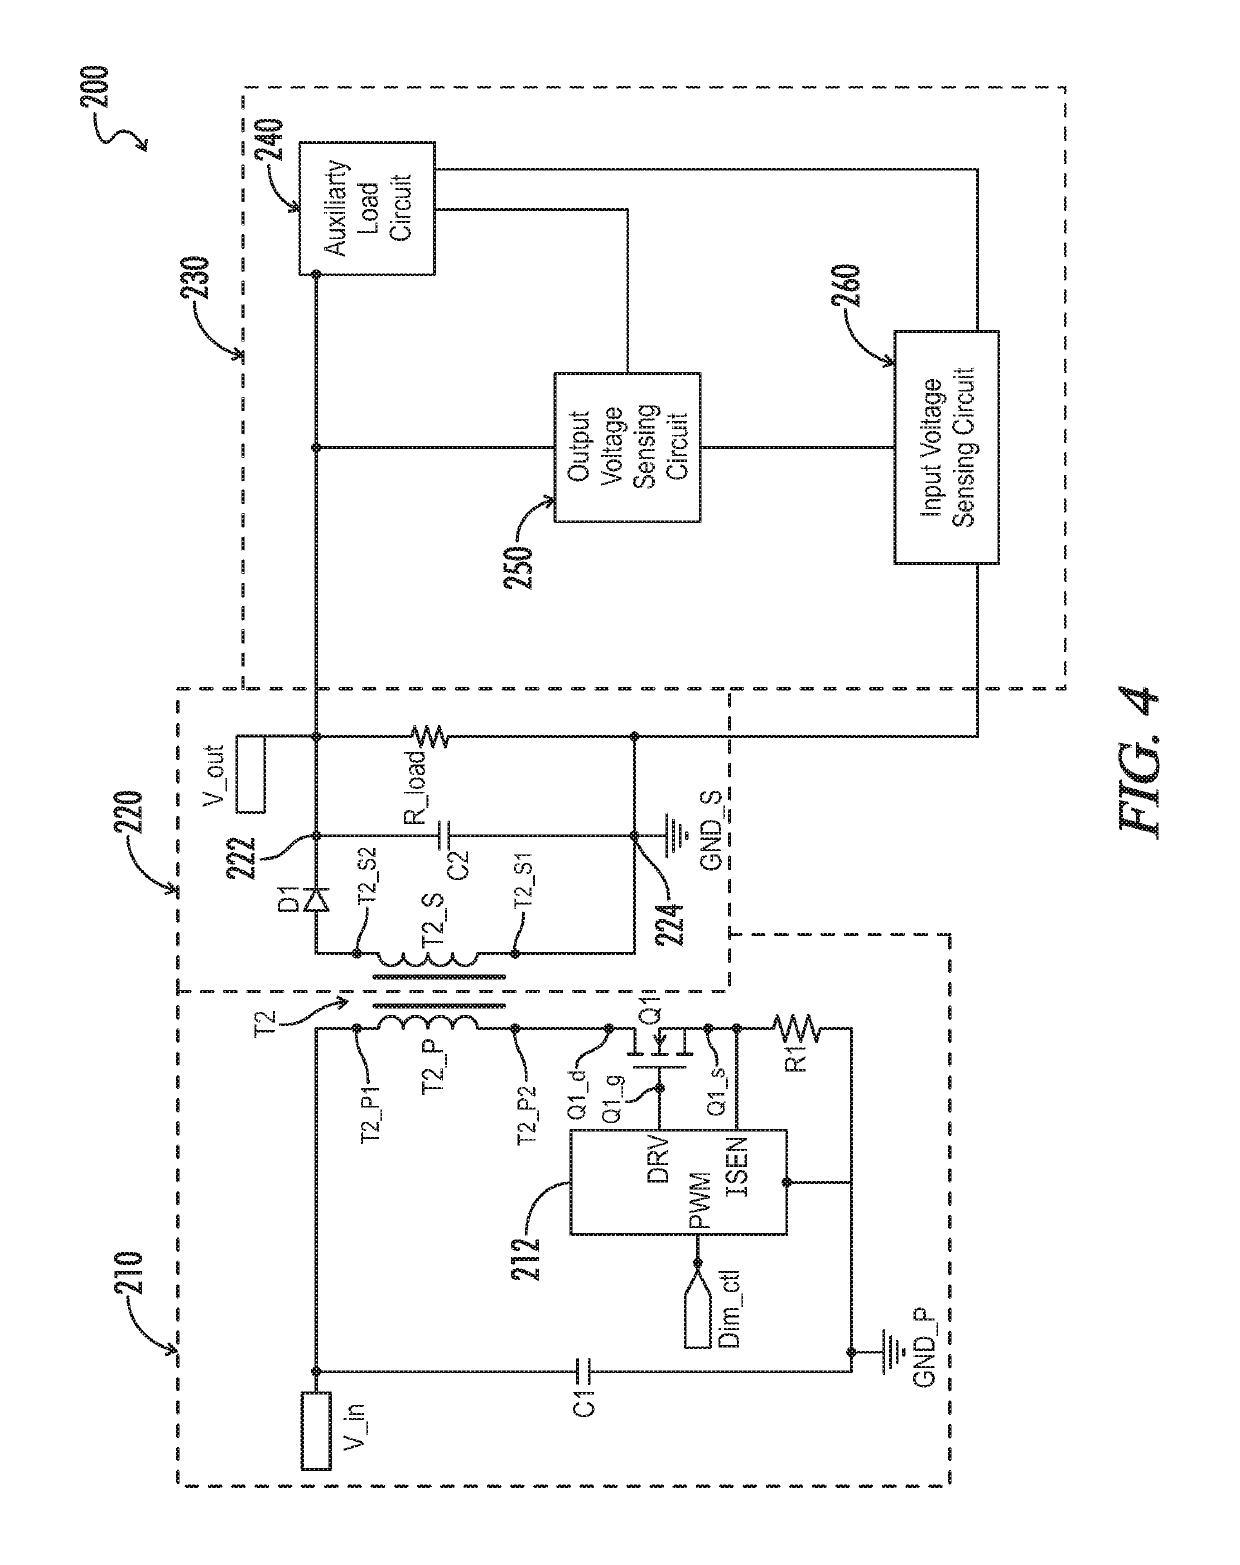 Flyback converter with load condition control circuit